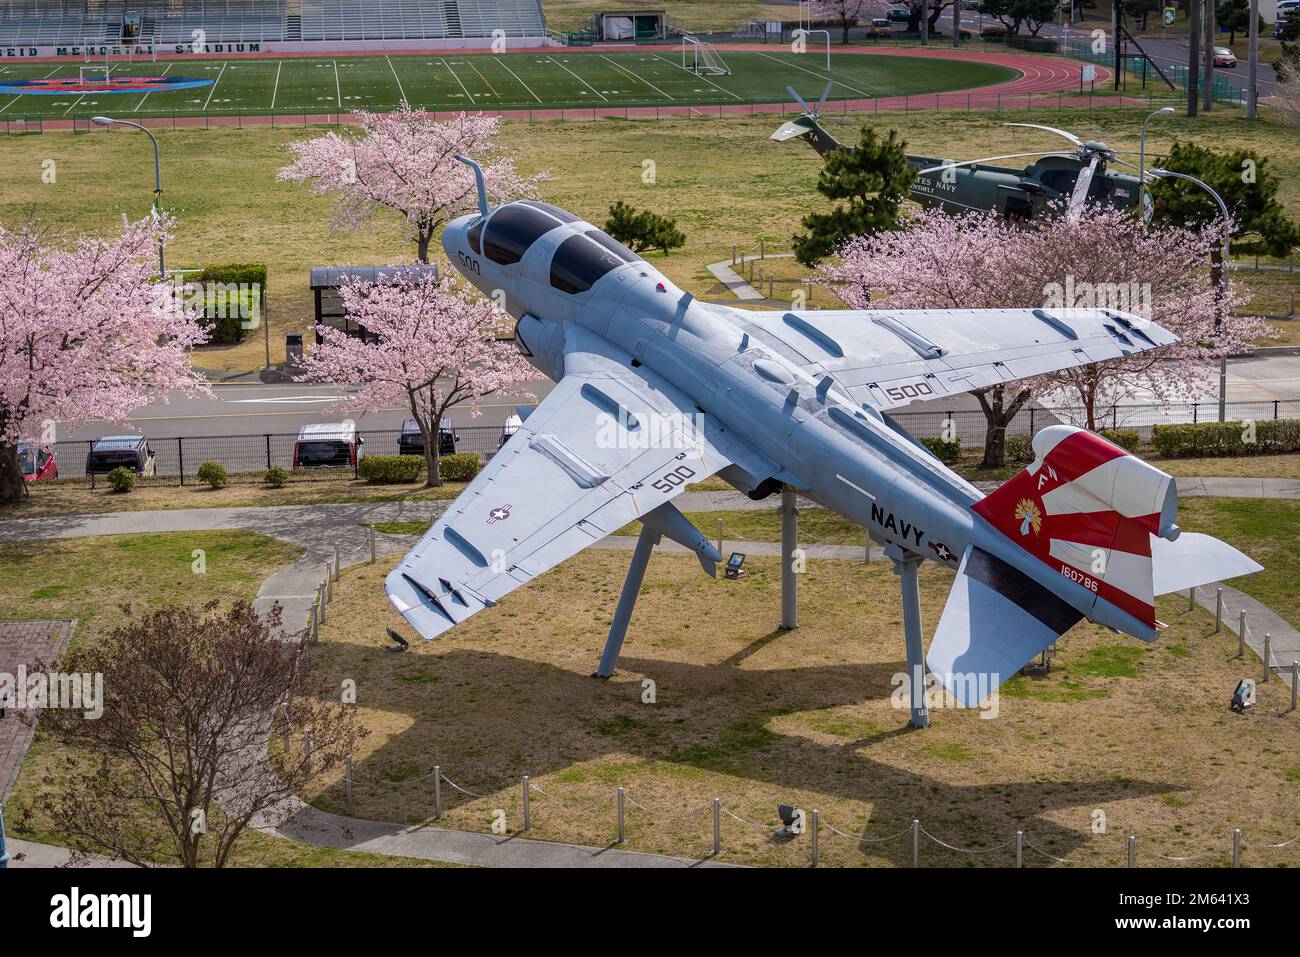 220330-N-VI040-1056 NAVAL AIR FACILITY ATSUGI, Japan (March 30, 2022) An EA-6B Prowler model sits on permanent display onboard Naval Air Facility (NAF) Atsugi as sakura (cherry blossoms) bloom throughout the installation. NAF Atsugi supports the combat readiness of Commander, Carrier Air Wing FIVE (CVW 5), Helicopter Maritime Strike Squadron FIVE ONE (HSM-51) and 30 other tenant commands and provides logistic support, coordination, and services to units assigned to the Western Pacific. Stock Photo